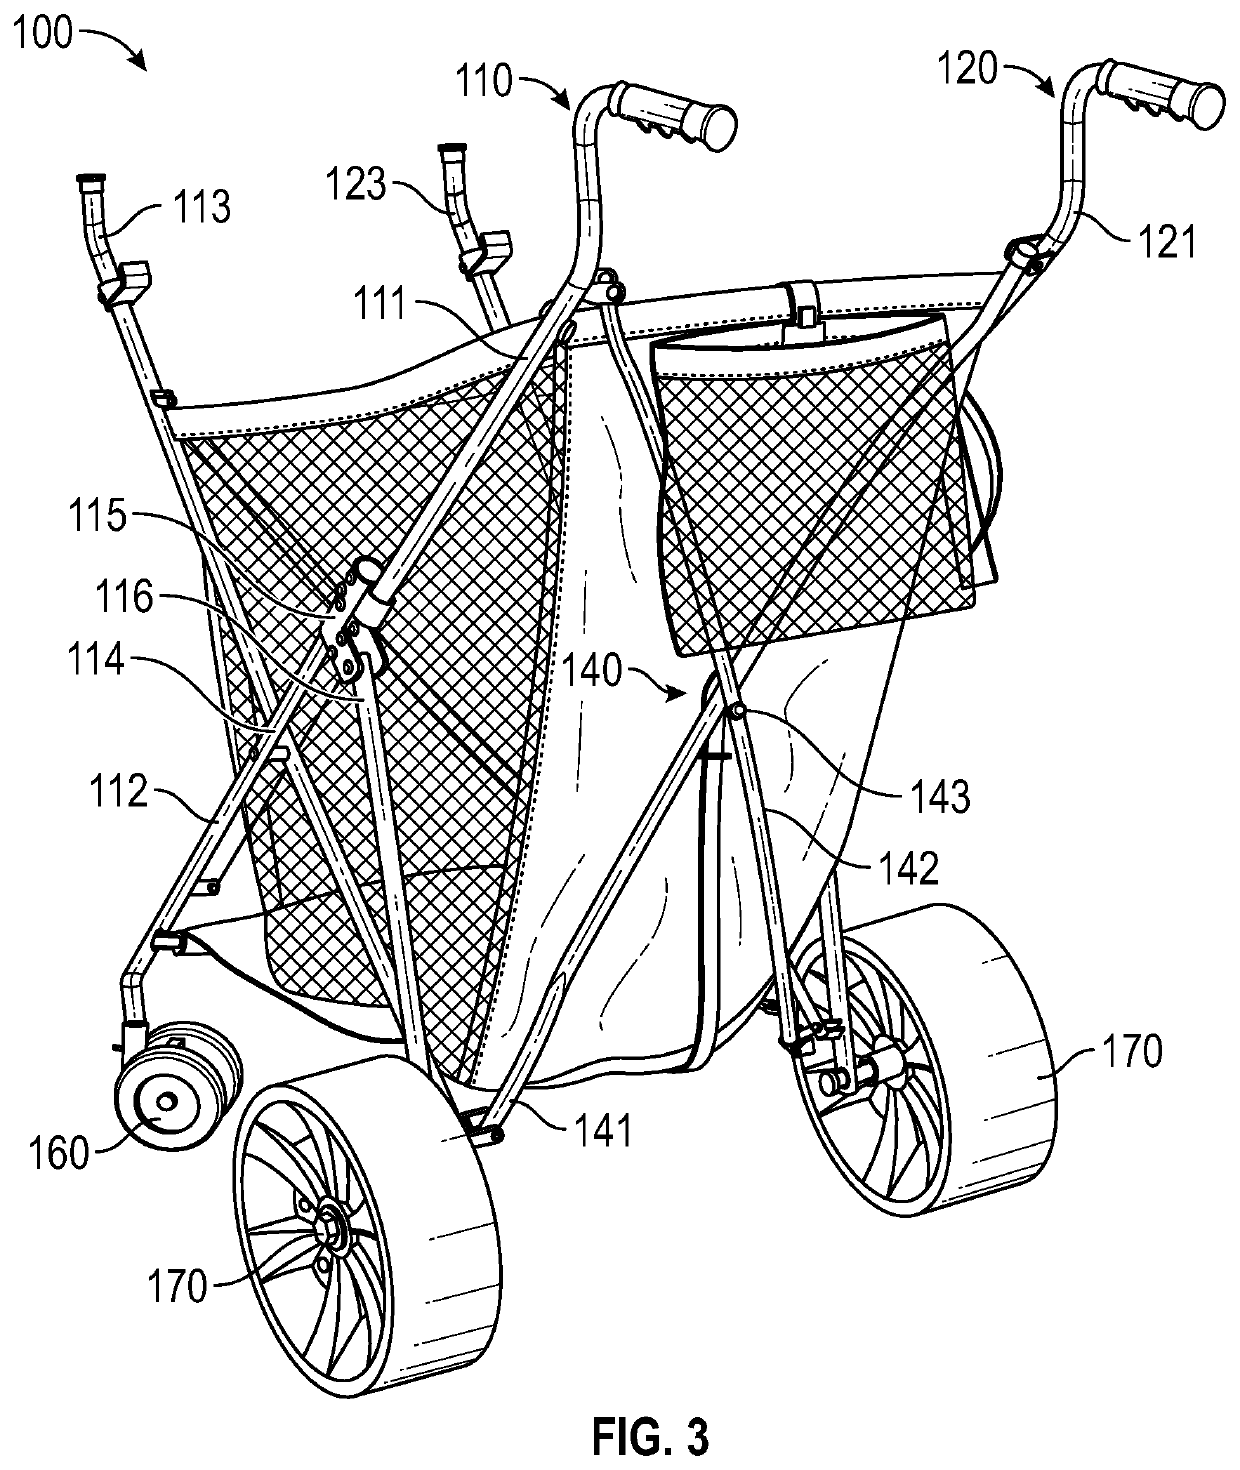 Collapsible cart with fabric in receiving space